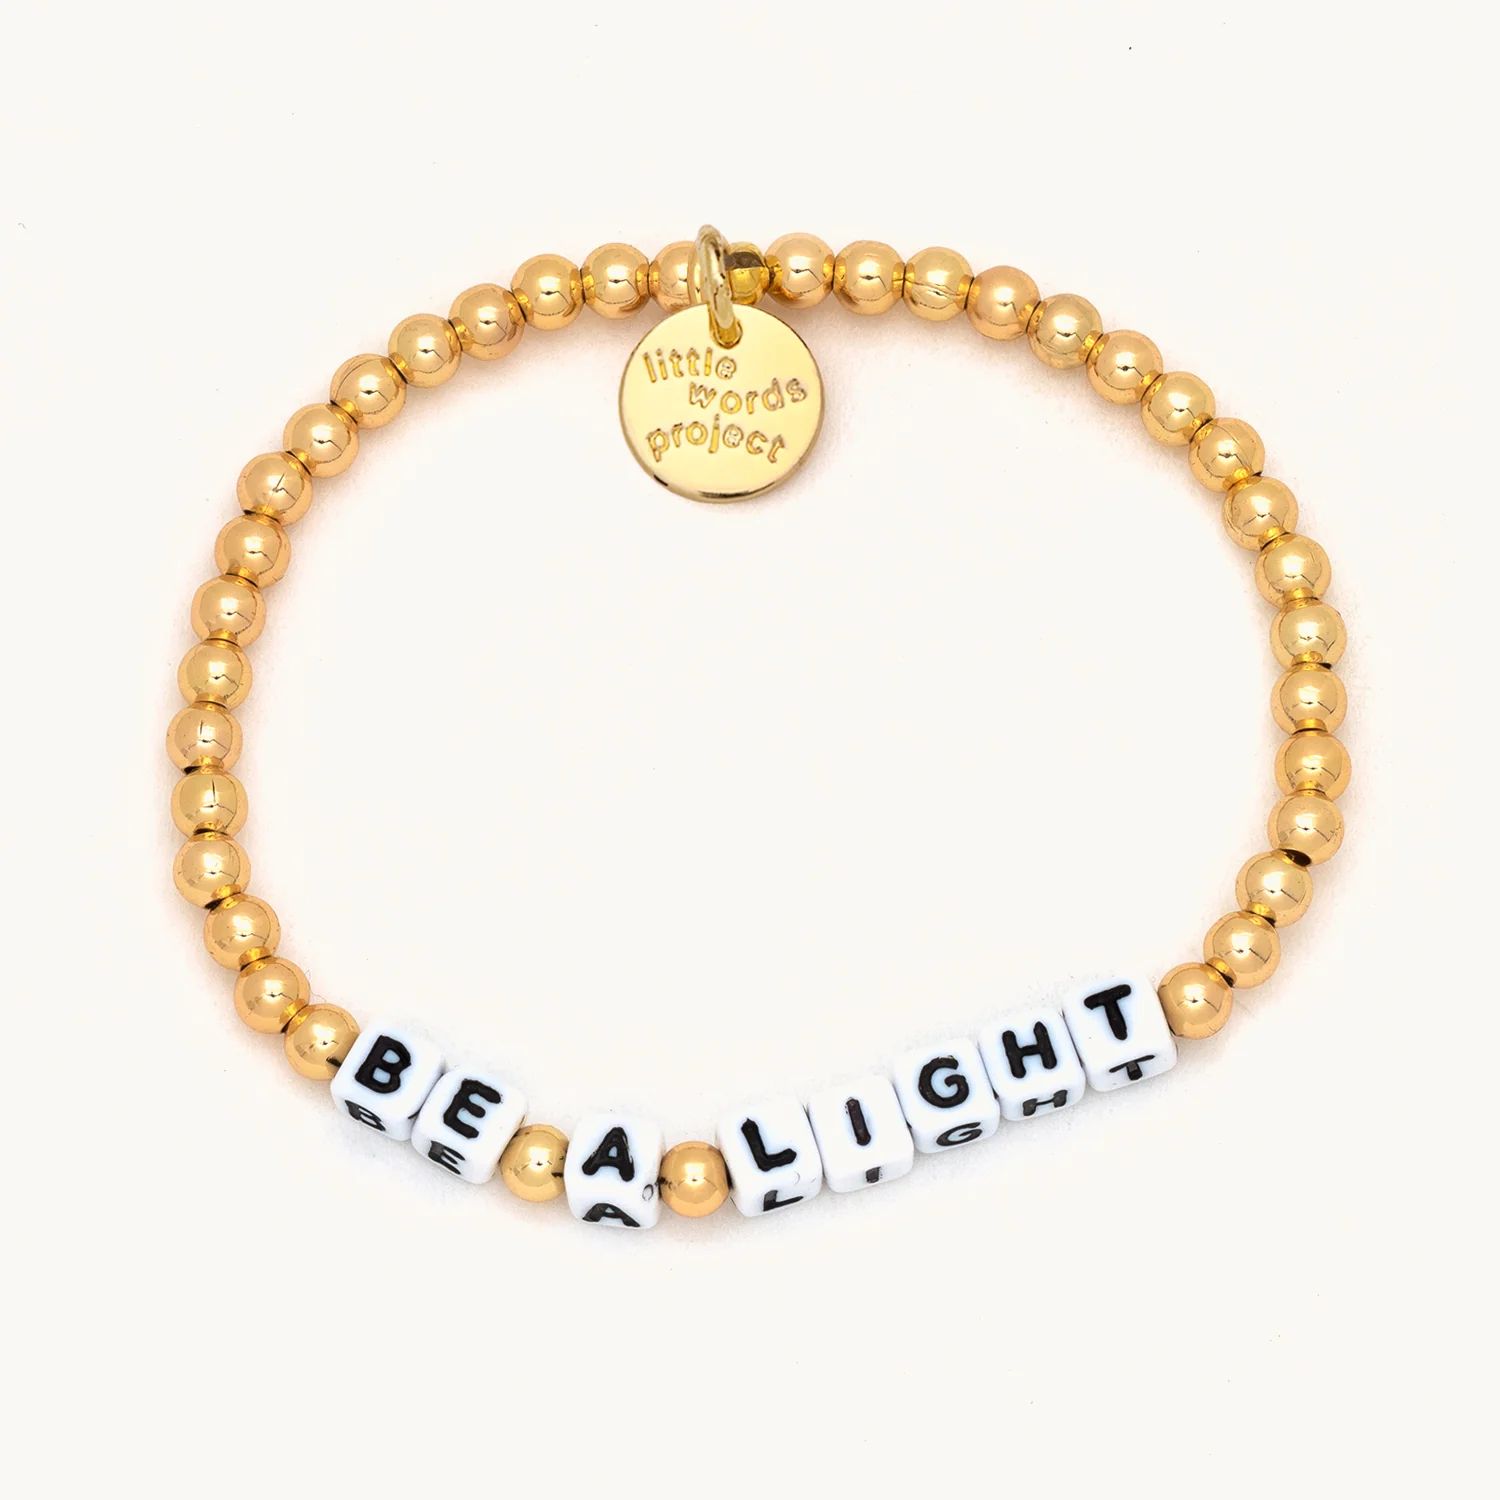 Be A Light- Gold-Filled | Little Words Project